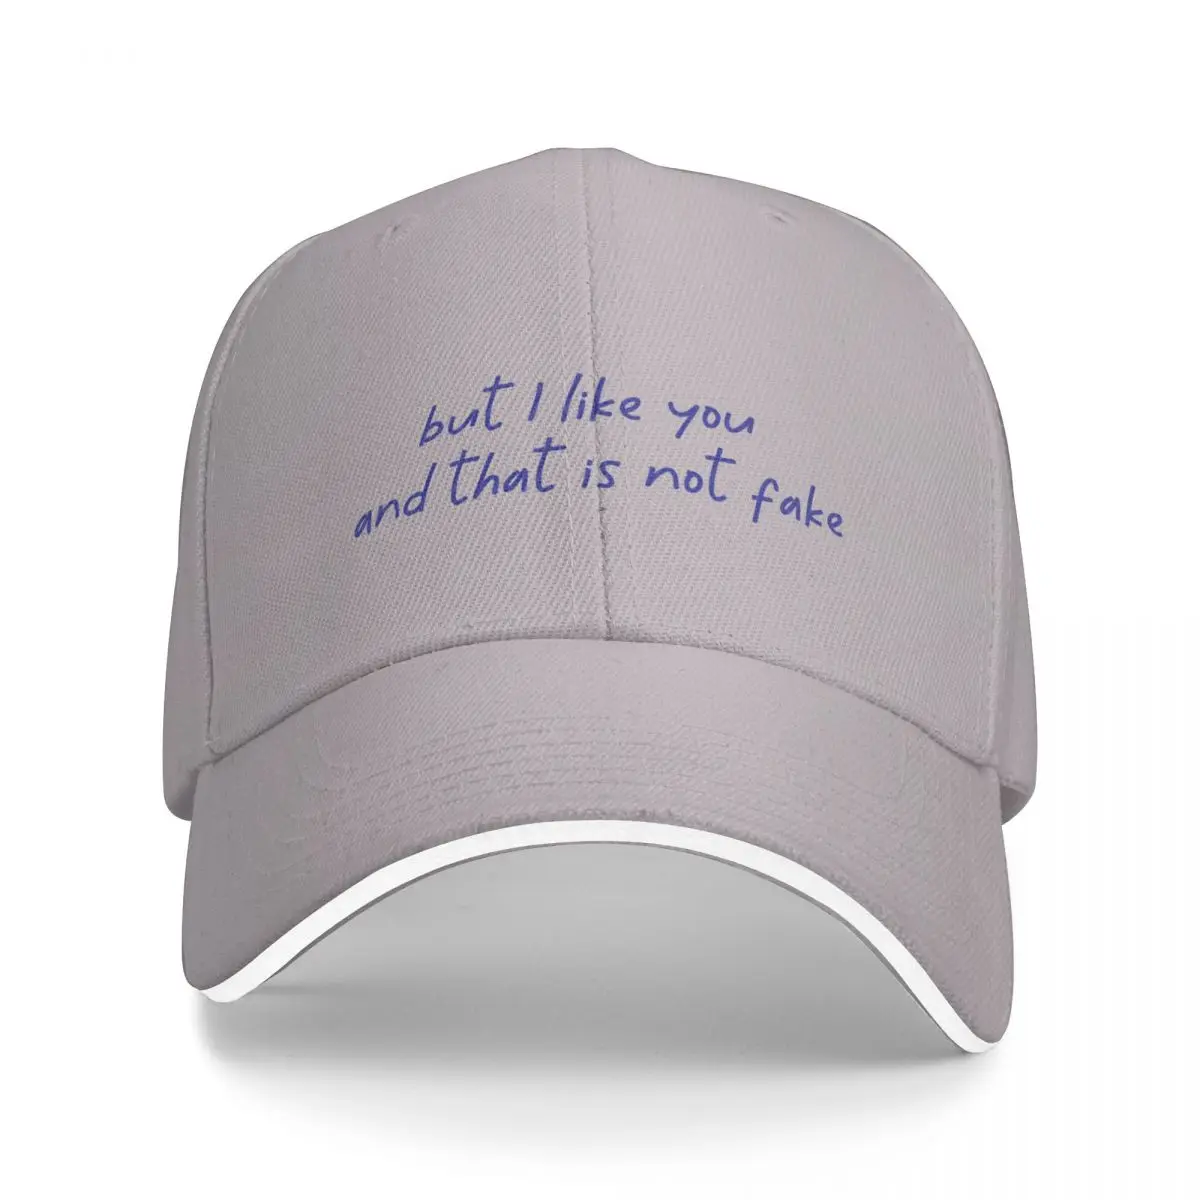 

New Young Royals Wilhelm quote "but i like you and that is not fake" Cap Baseball Cap Cap male Luxury cap mens cap